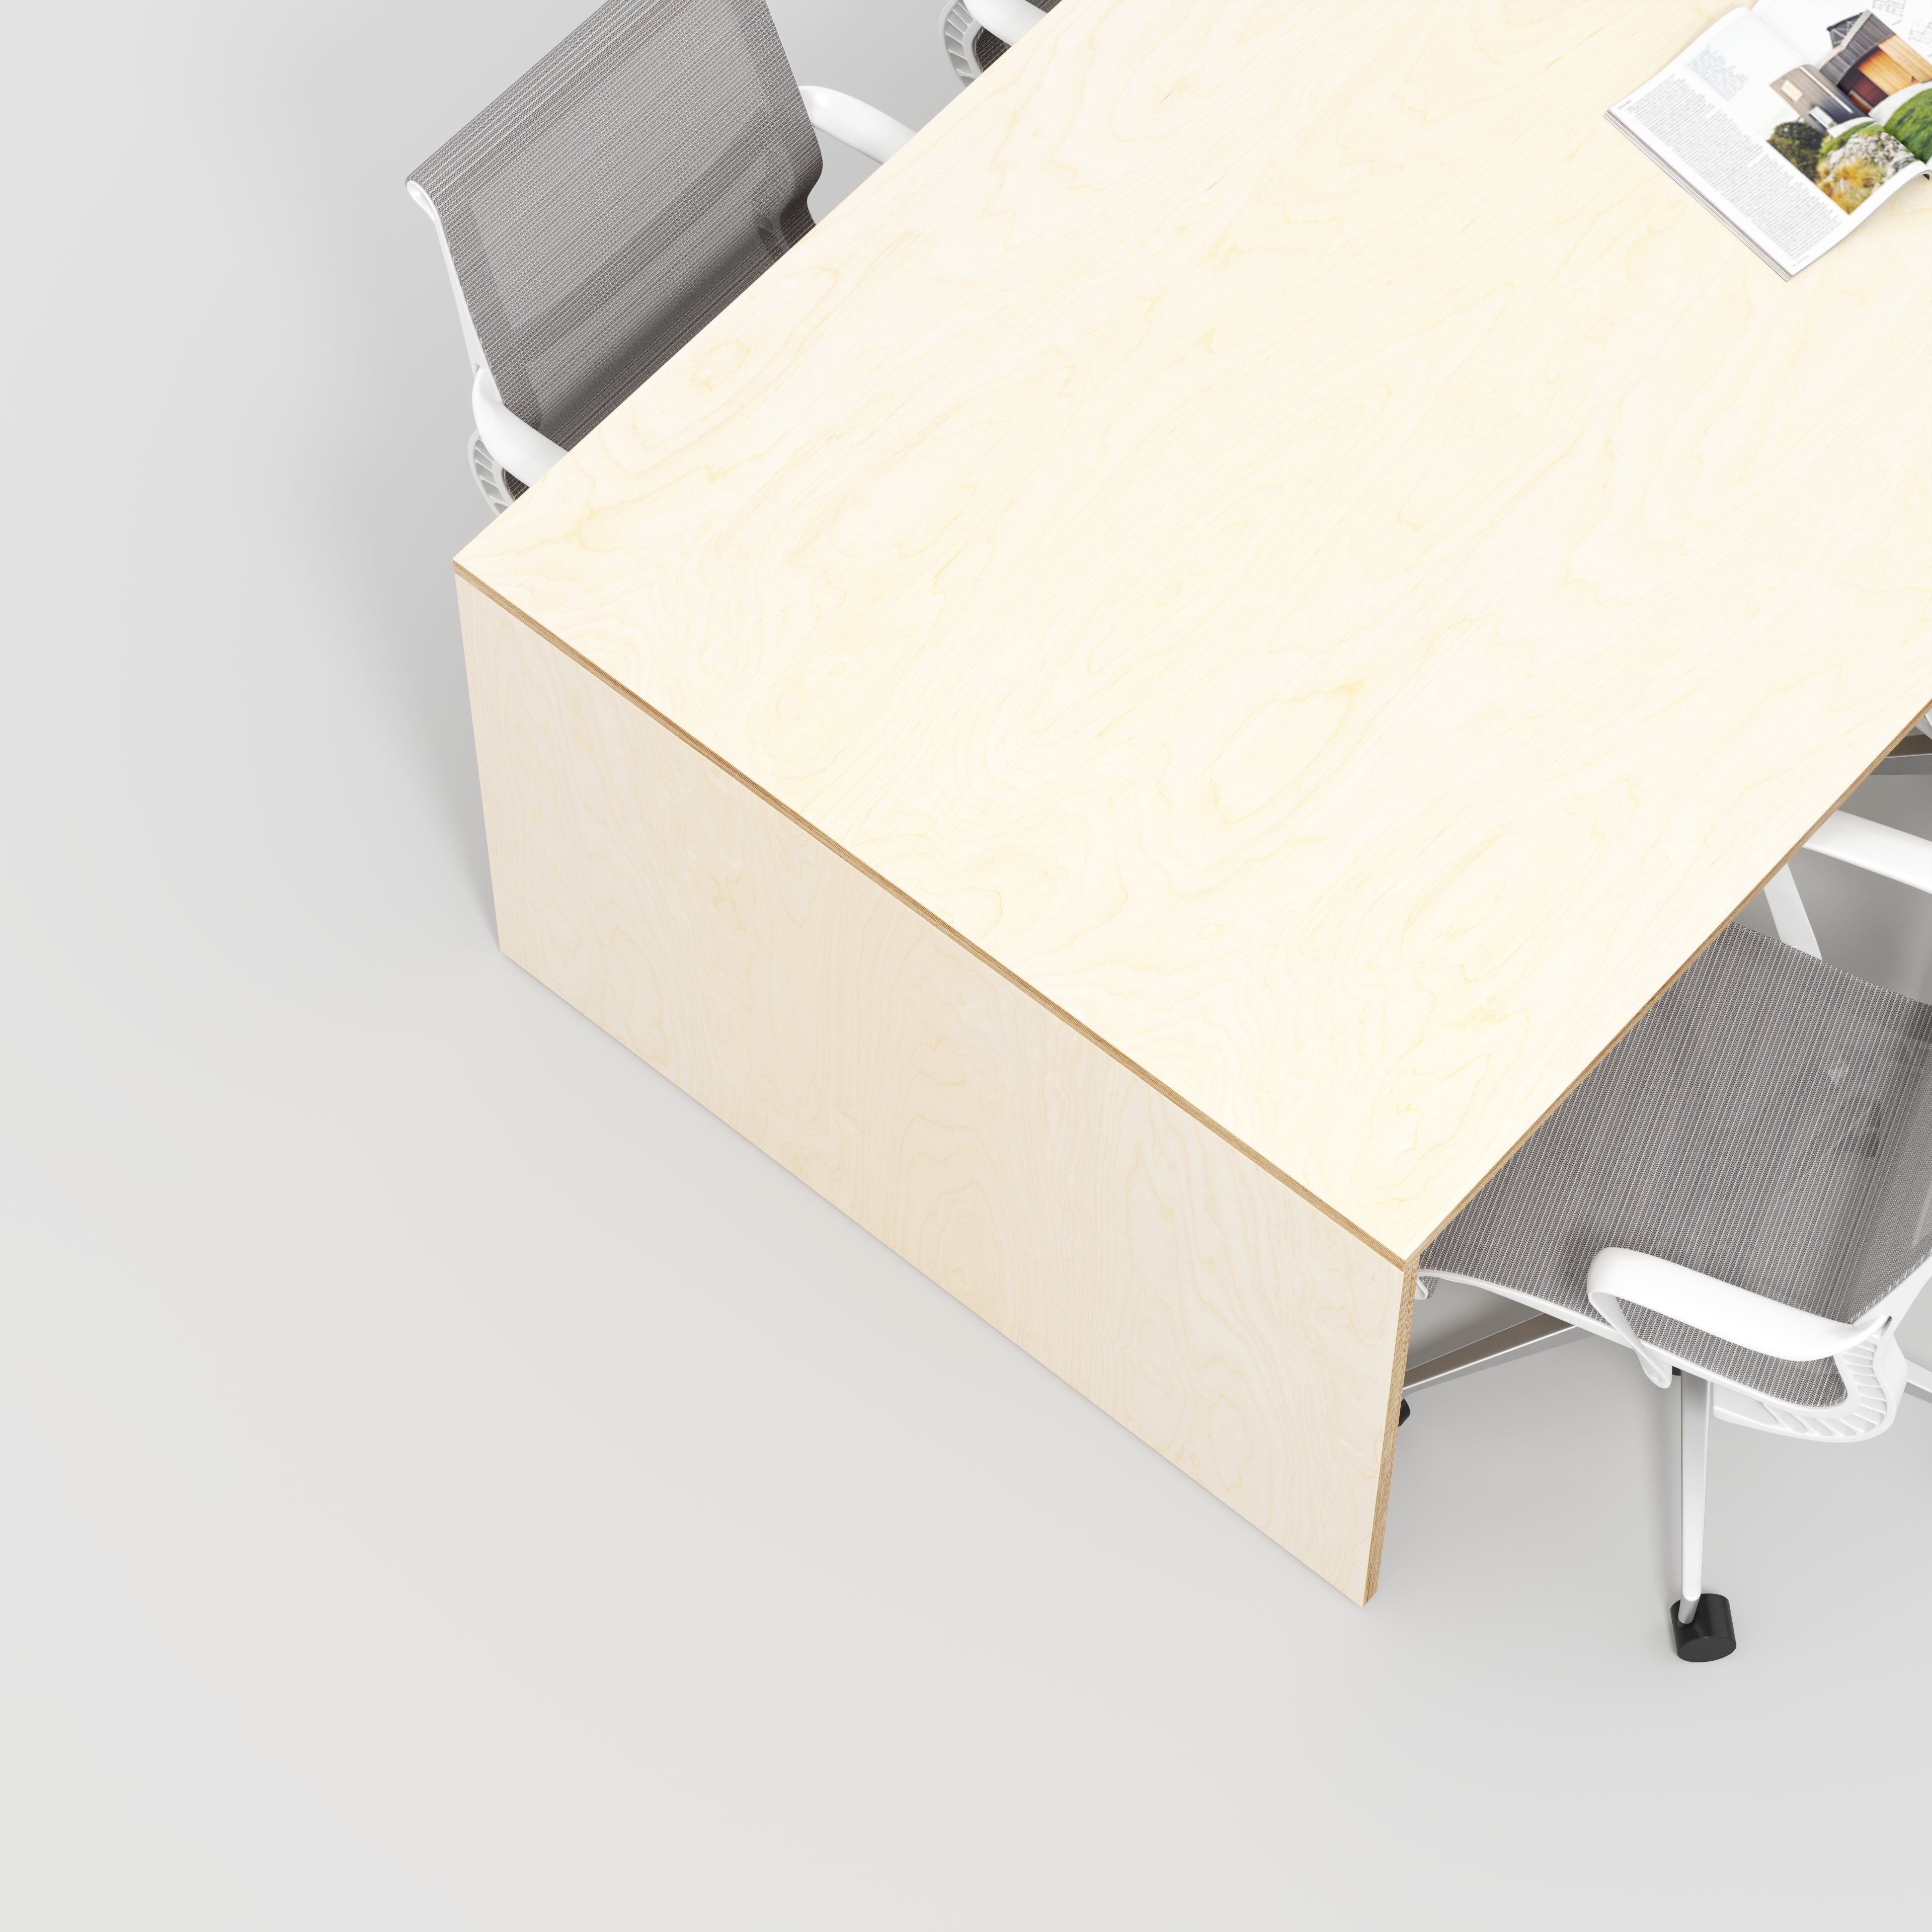 Table with Solid Sides - Plywood Birch - 4000(w) x 1000(d) x 750(h)